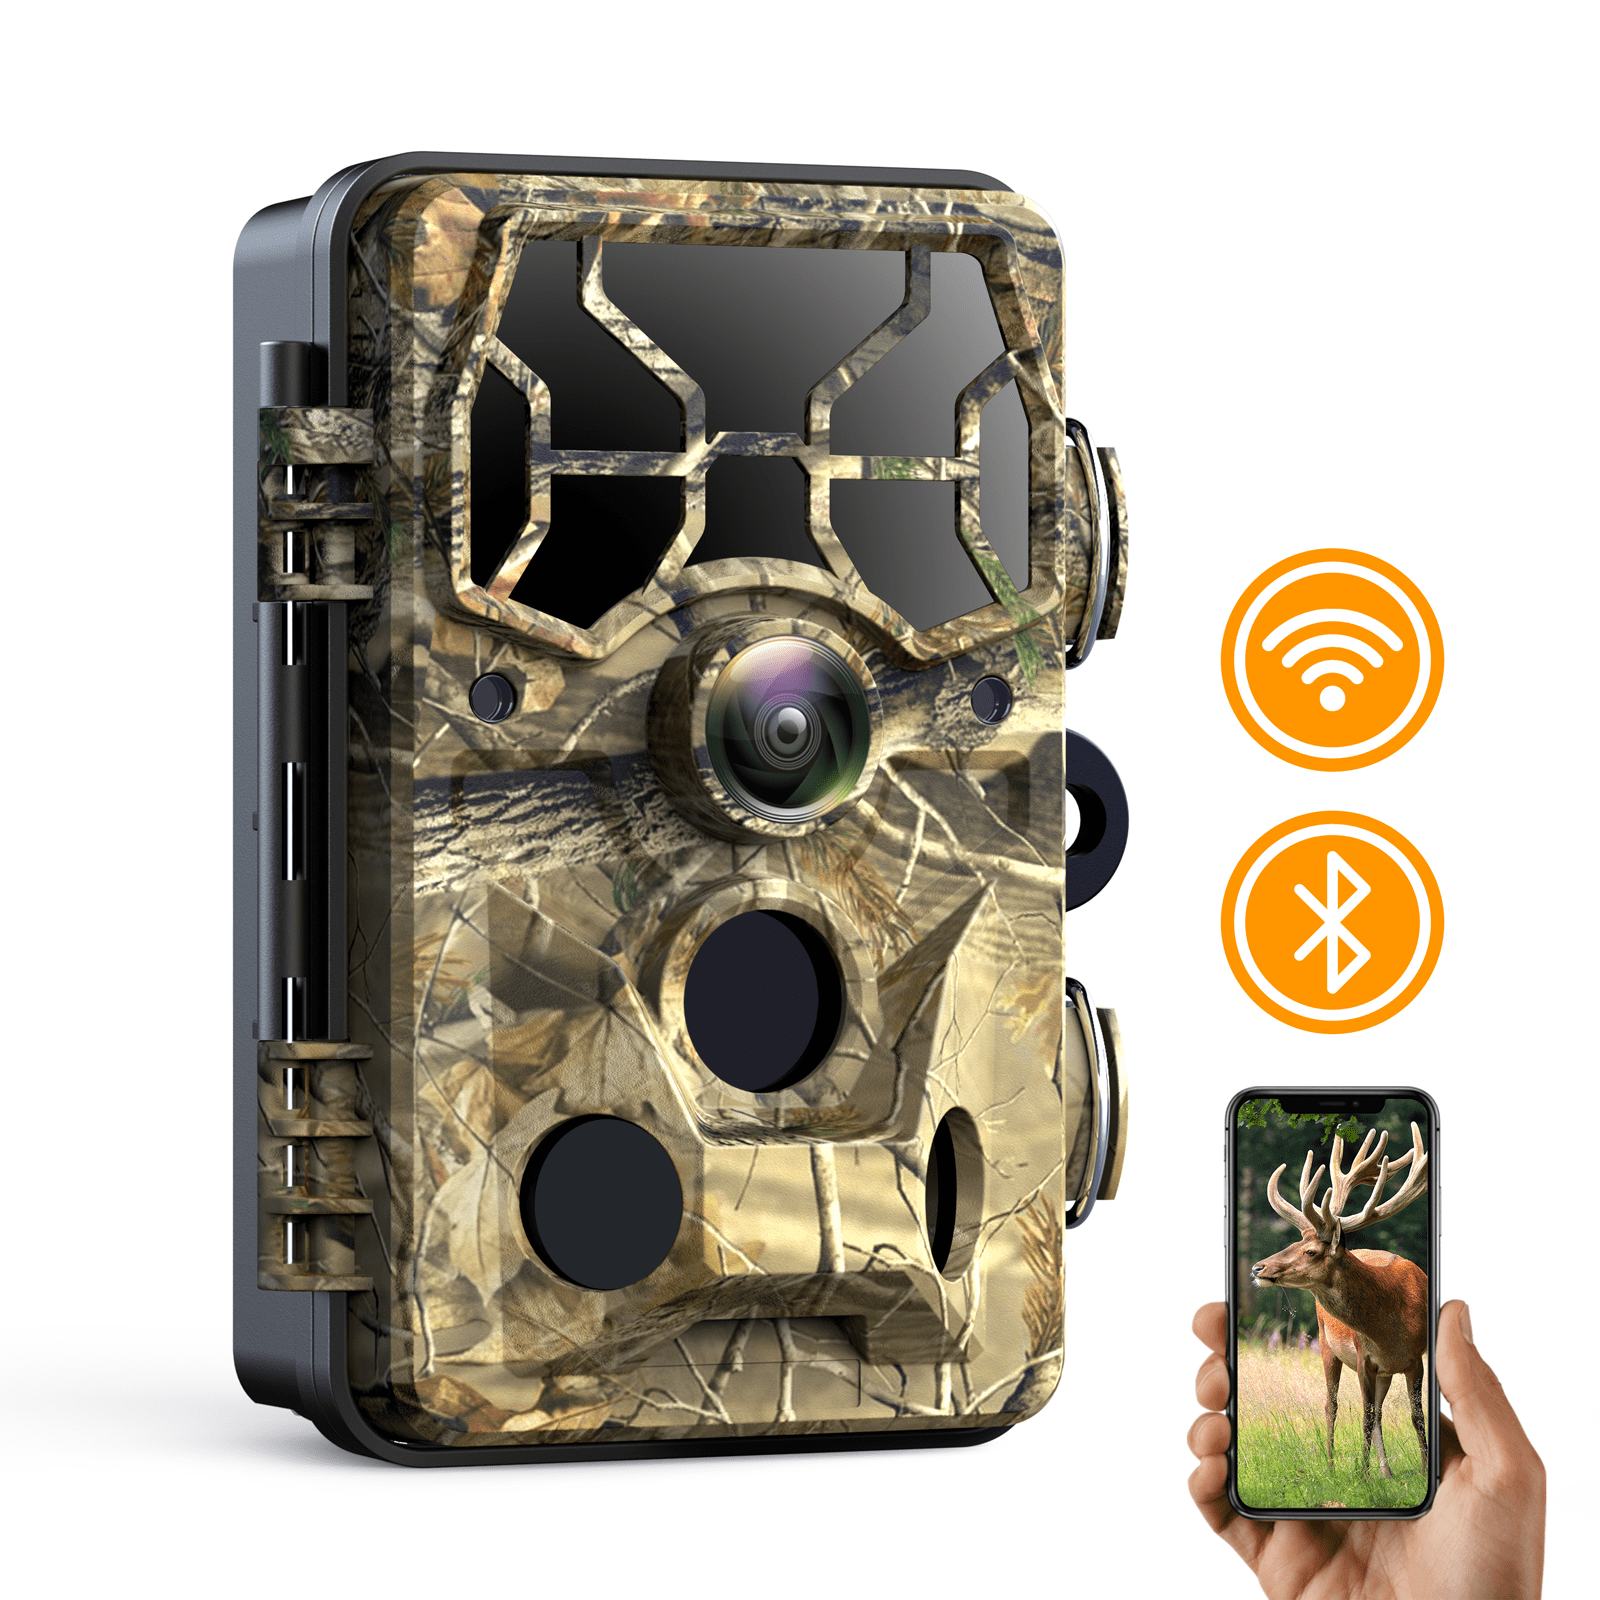 Details about   WiFi Trail Camera TOGUARD 20MP 1296P Wildlife Hunting Game Camera Night Vision 